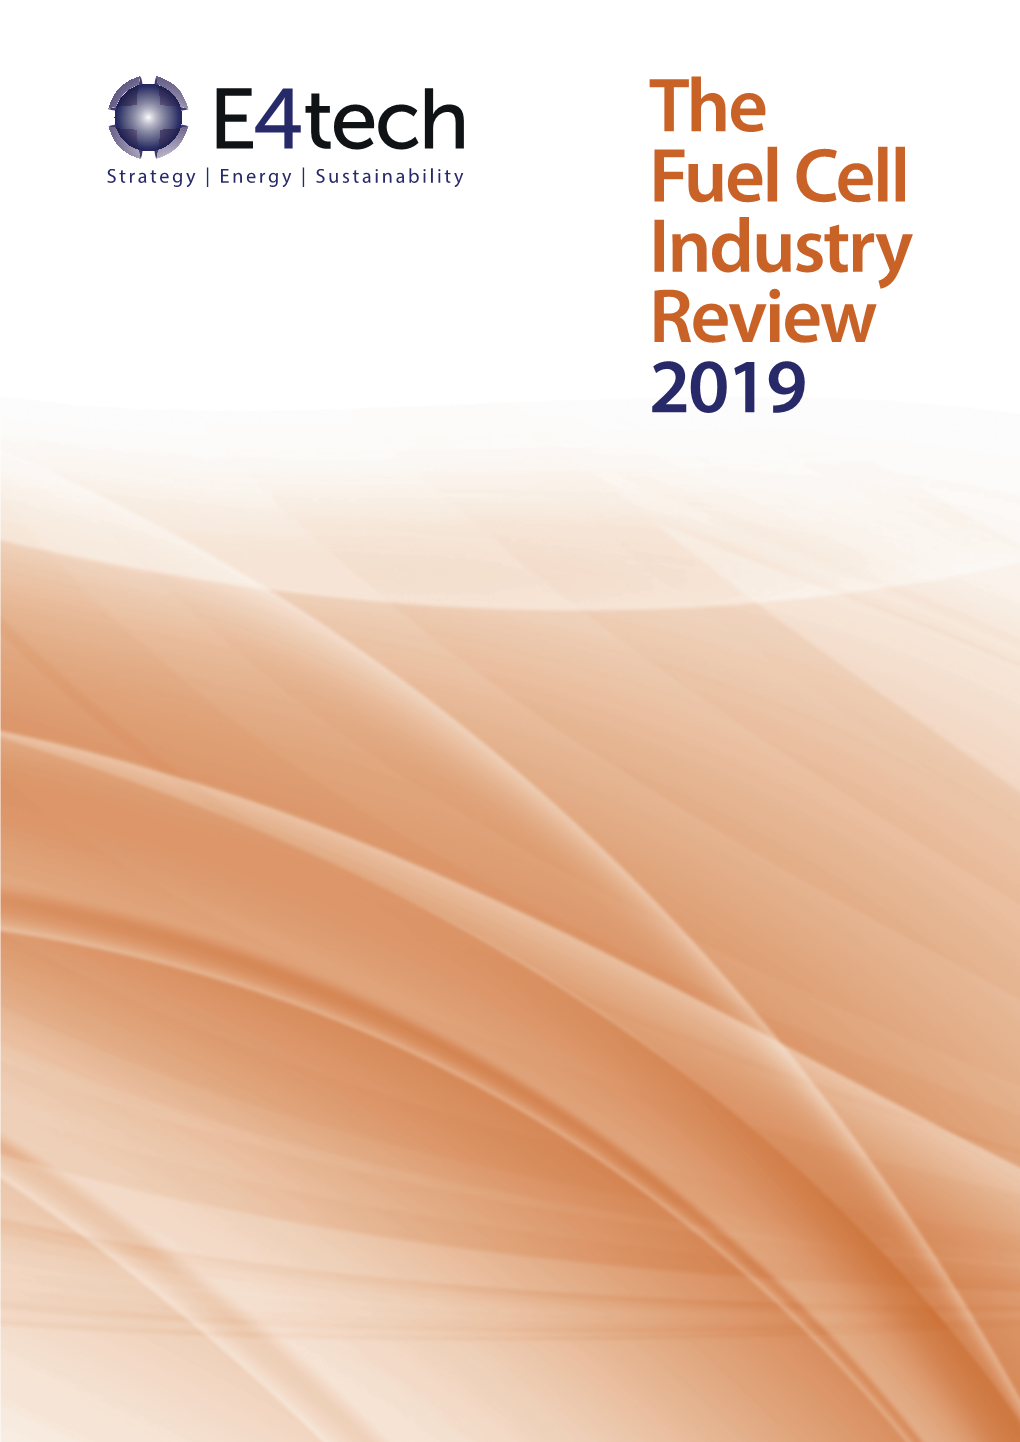 The Fuel Cell Industry Review 2019